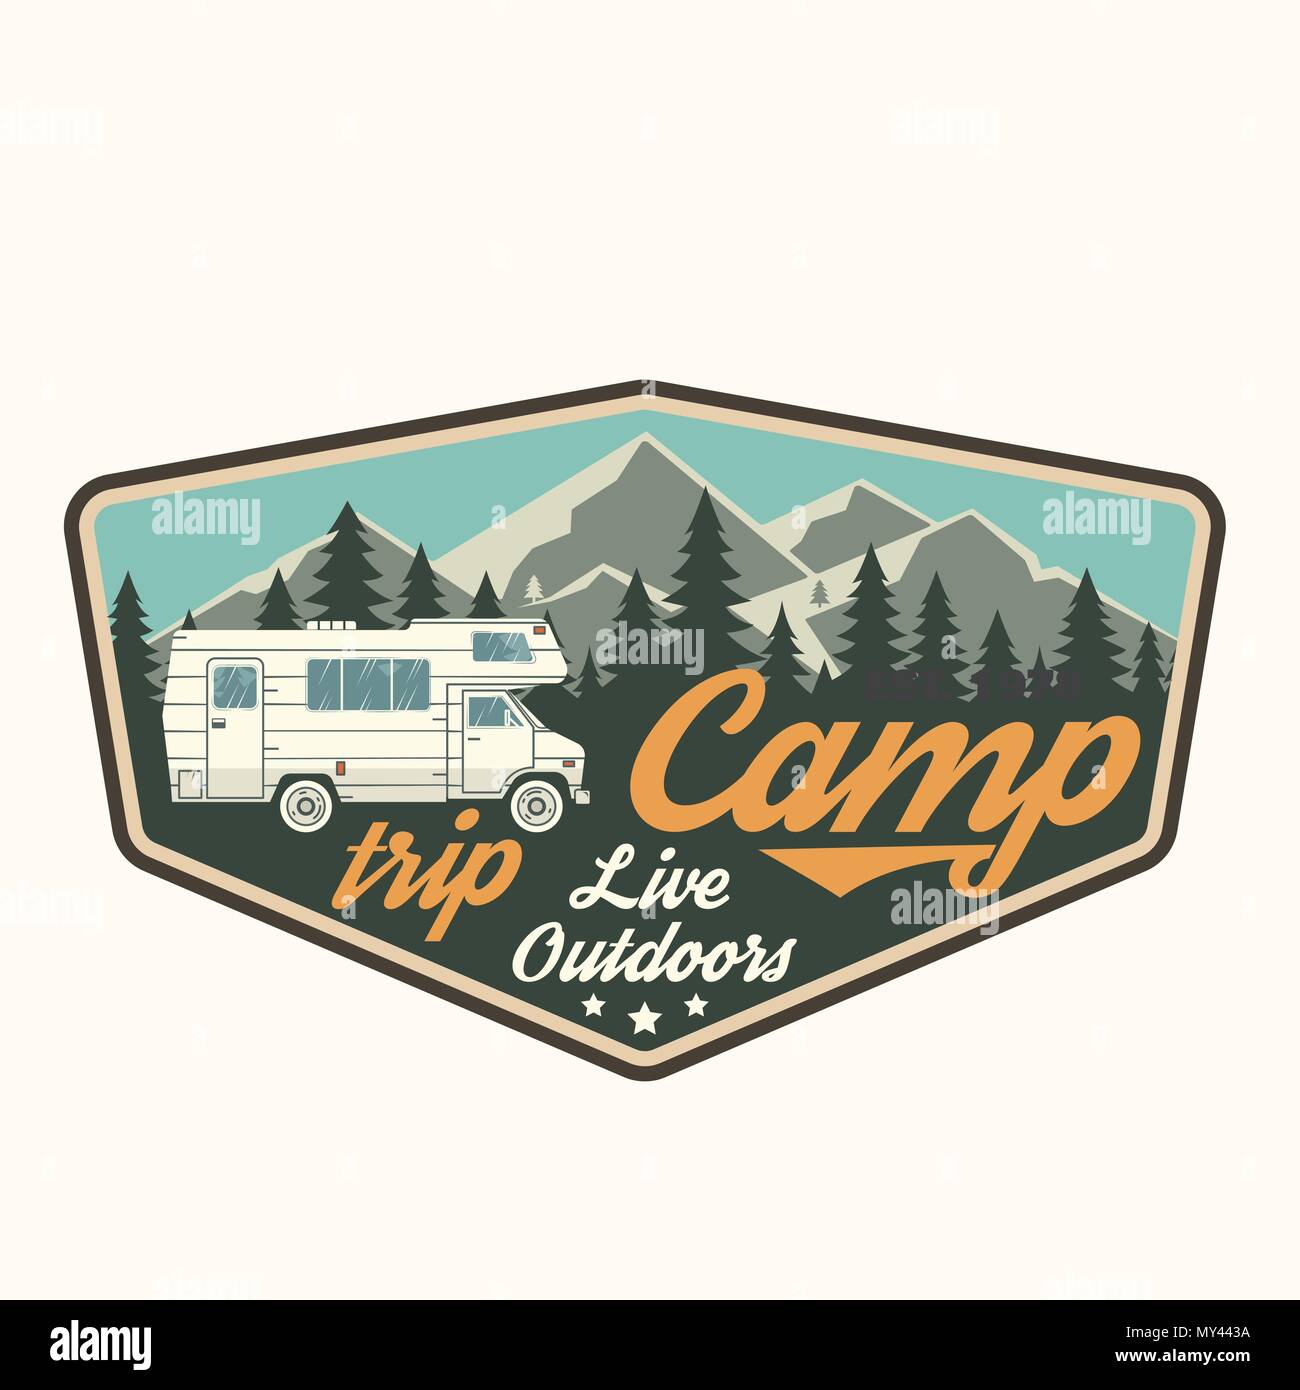 Camp trip. Live outdoors. Vector illustration. Concept for shirt or logo, print, stamp, patch or tee. Vintage typography design with Camper Van silhouette. Stock Vector